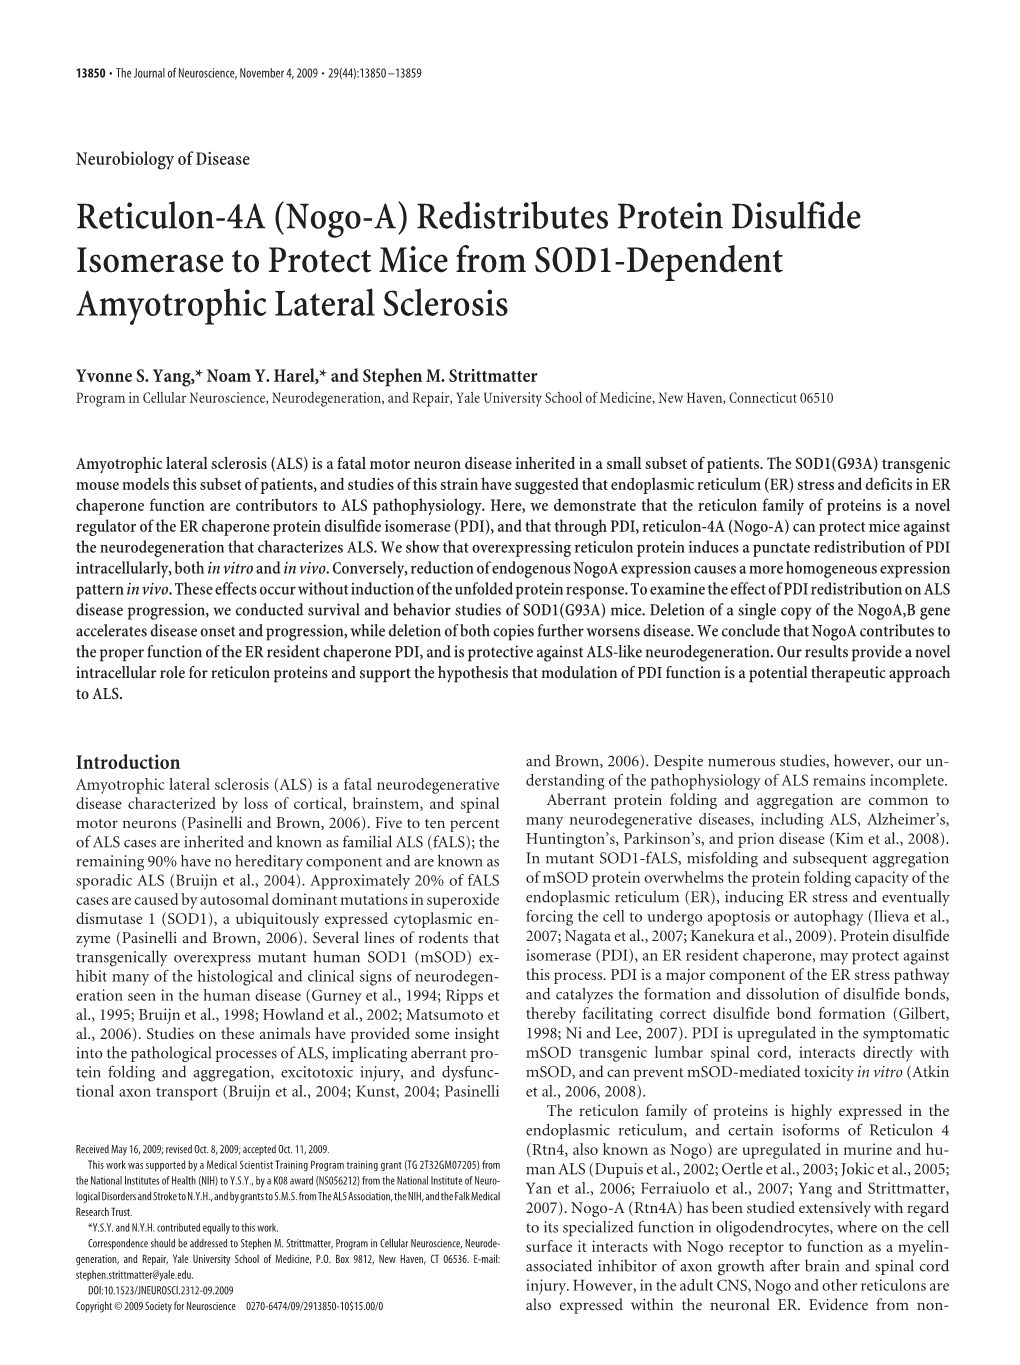 (Nogo-A) Redistributes Protein Disulfide Isomerase to Protect Mice from SOD1-Dependent Amyotrophic Lateral Sclerosis